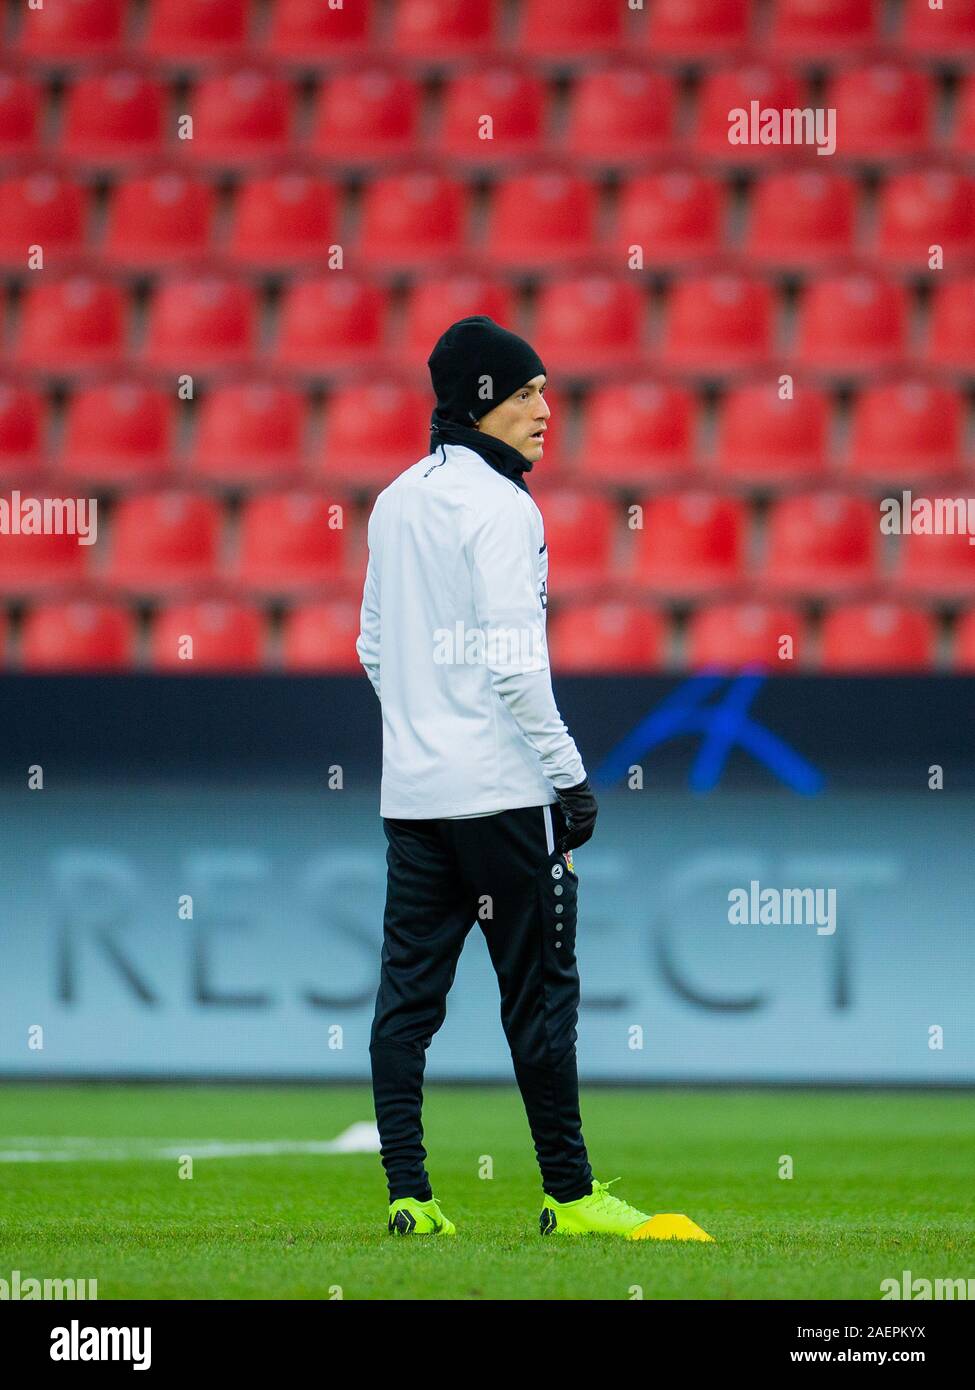 Leverkusen, Germany. 10th Dec, 2019. Soccer: Champions League, Bayer Leverkusen - Juventus Turin, Group stage, Group D, 6th matchday, training and press conference. Leverkusen's Charles Aranguiz participates in the training. Credit: Rolf Vennenbernd/dpa/Alamy Live News Stock Photo